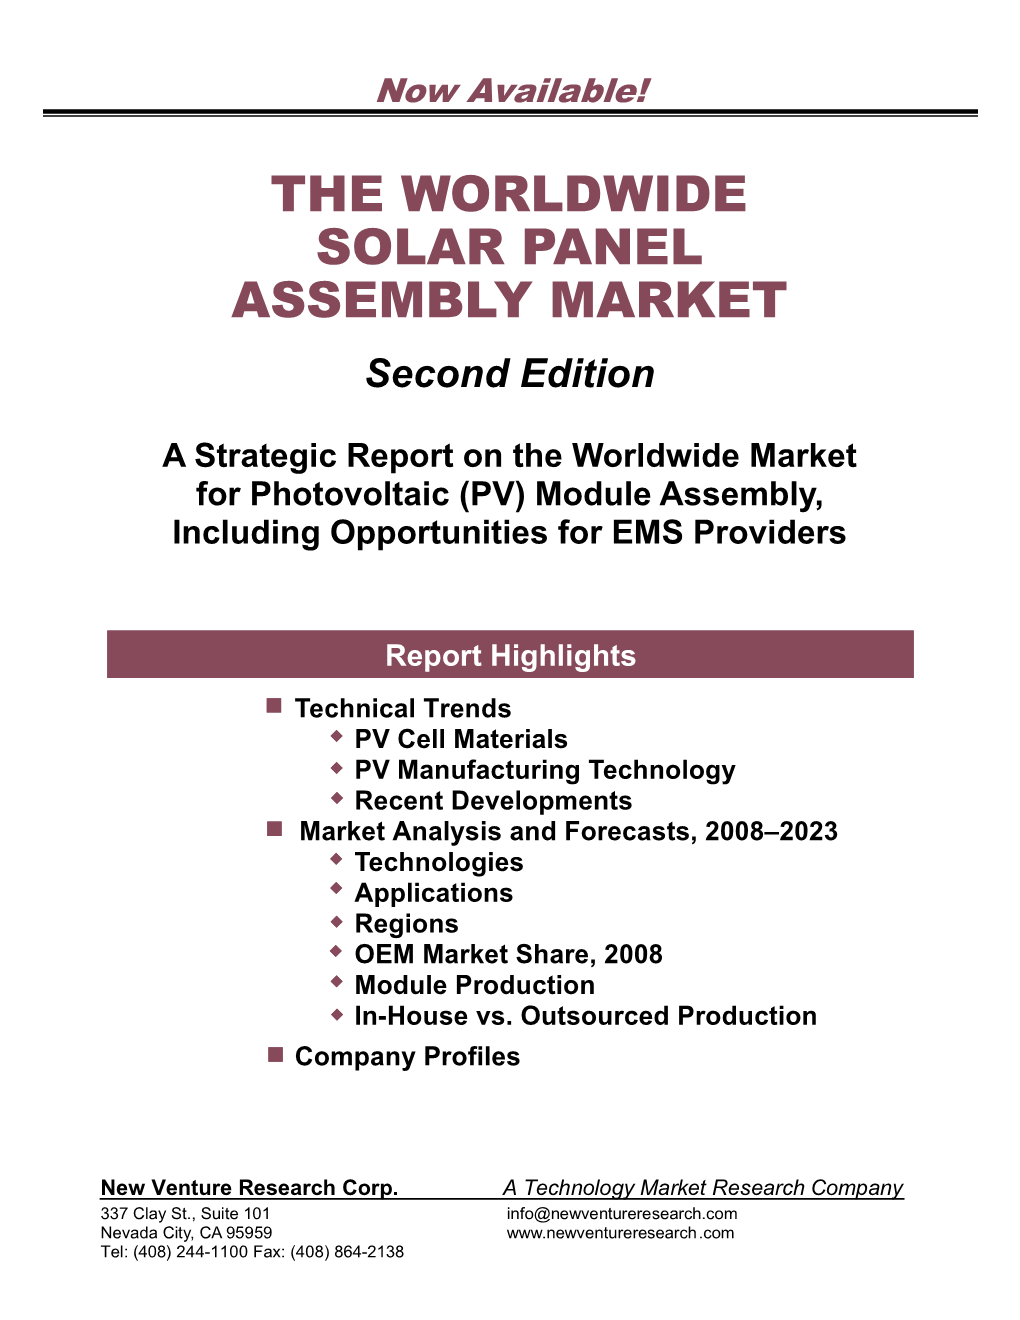 THE WORLDWIDE SOLAR PANEL ASSEMBLY MARKET Second Edition